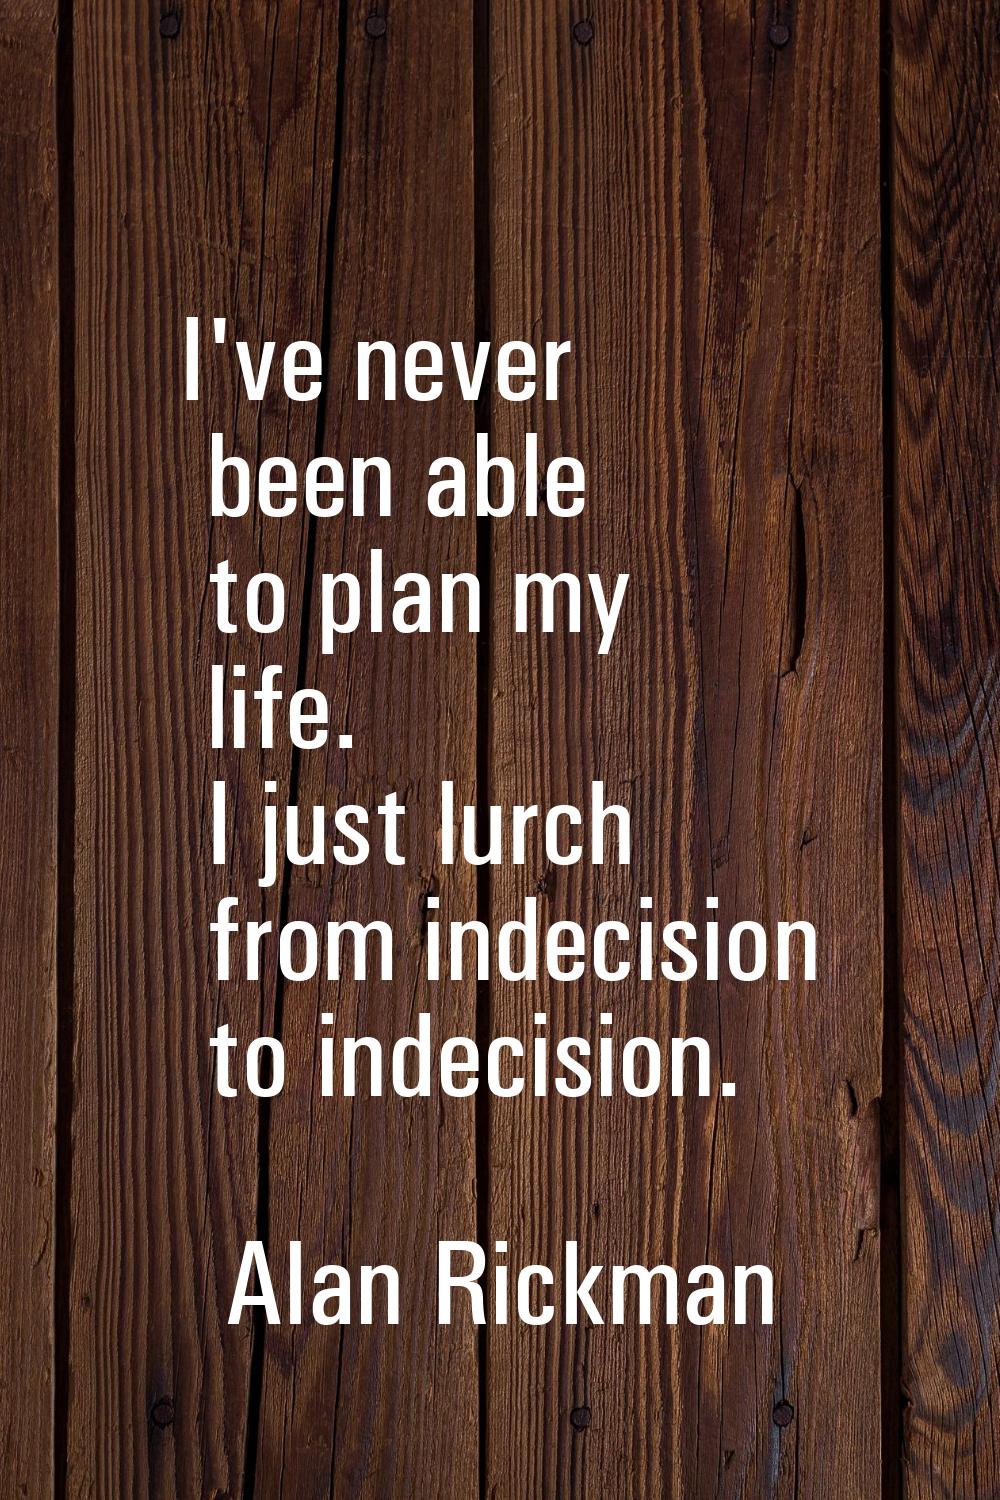 I've never been able to plan my life. I just lurch from indecision to indecision.